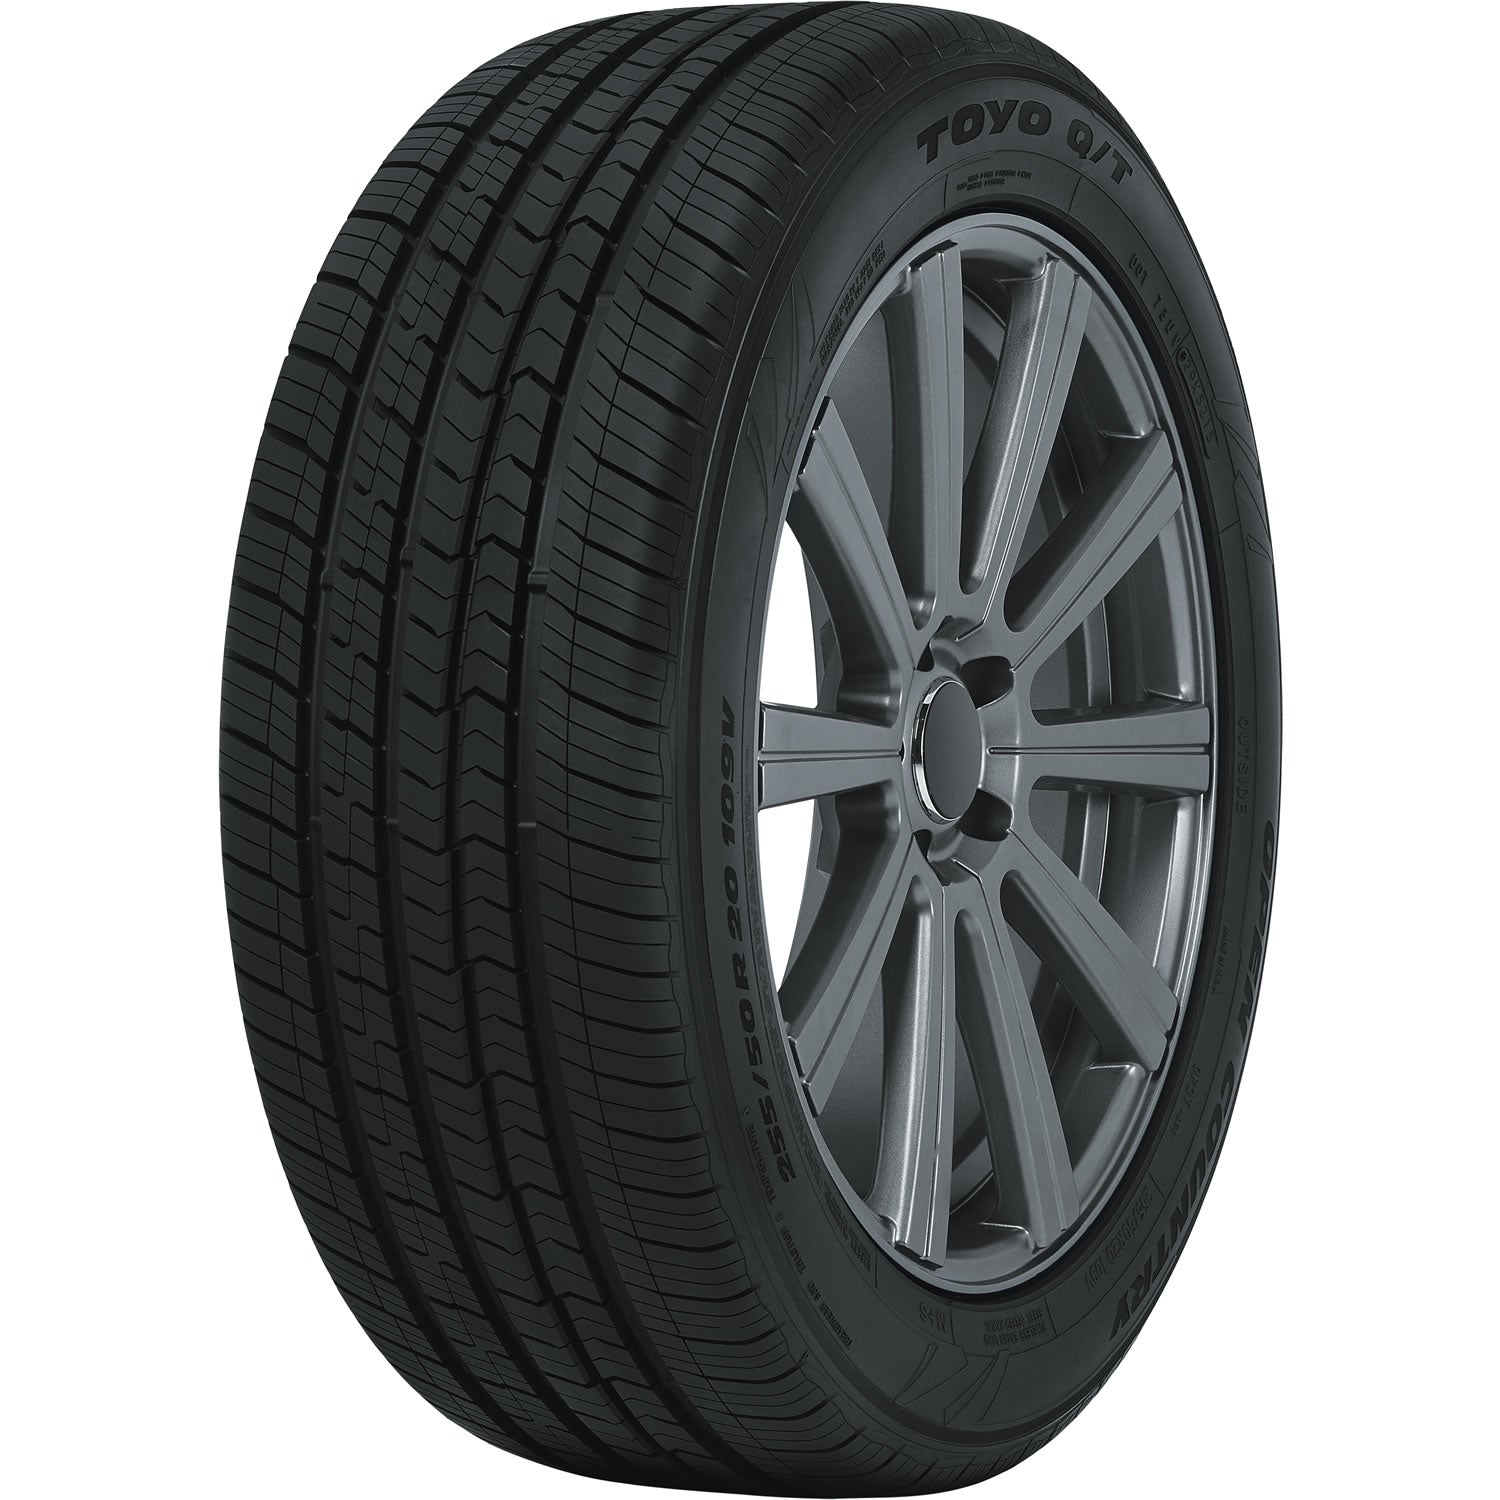 TOYO TIRES OPEN COUNTRY Q/T 225/70R16 (28.4X9R 16) Tires